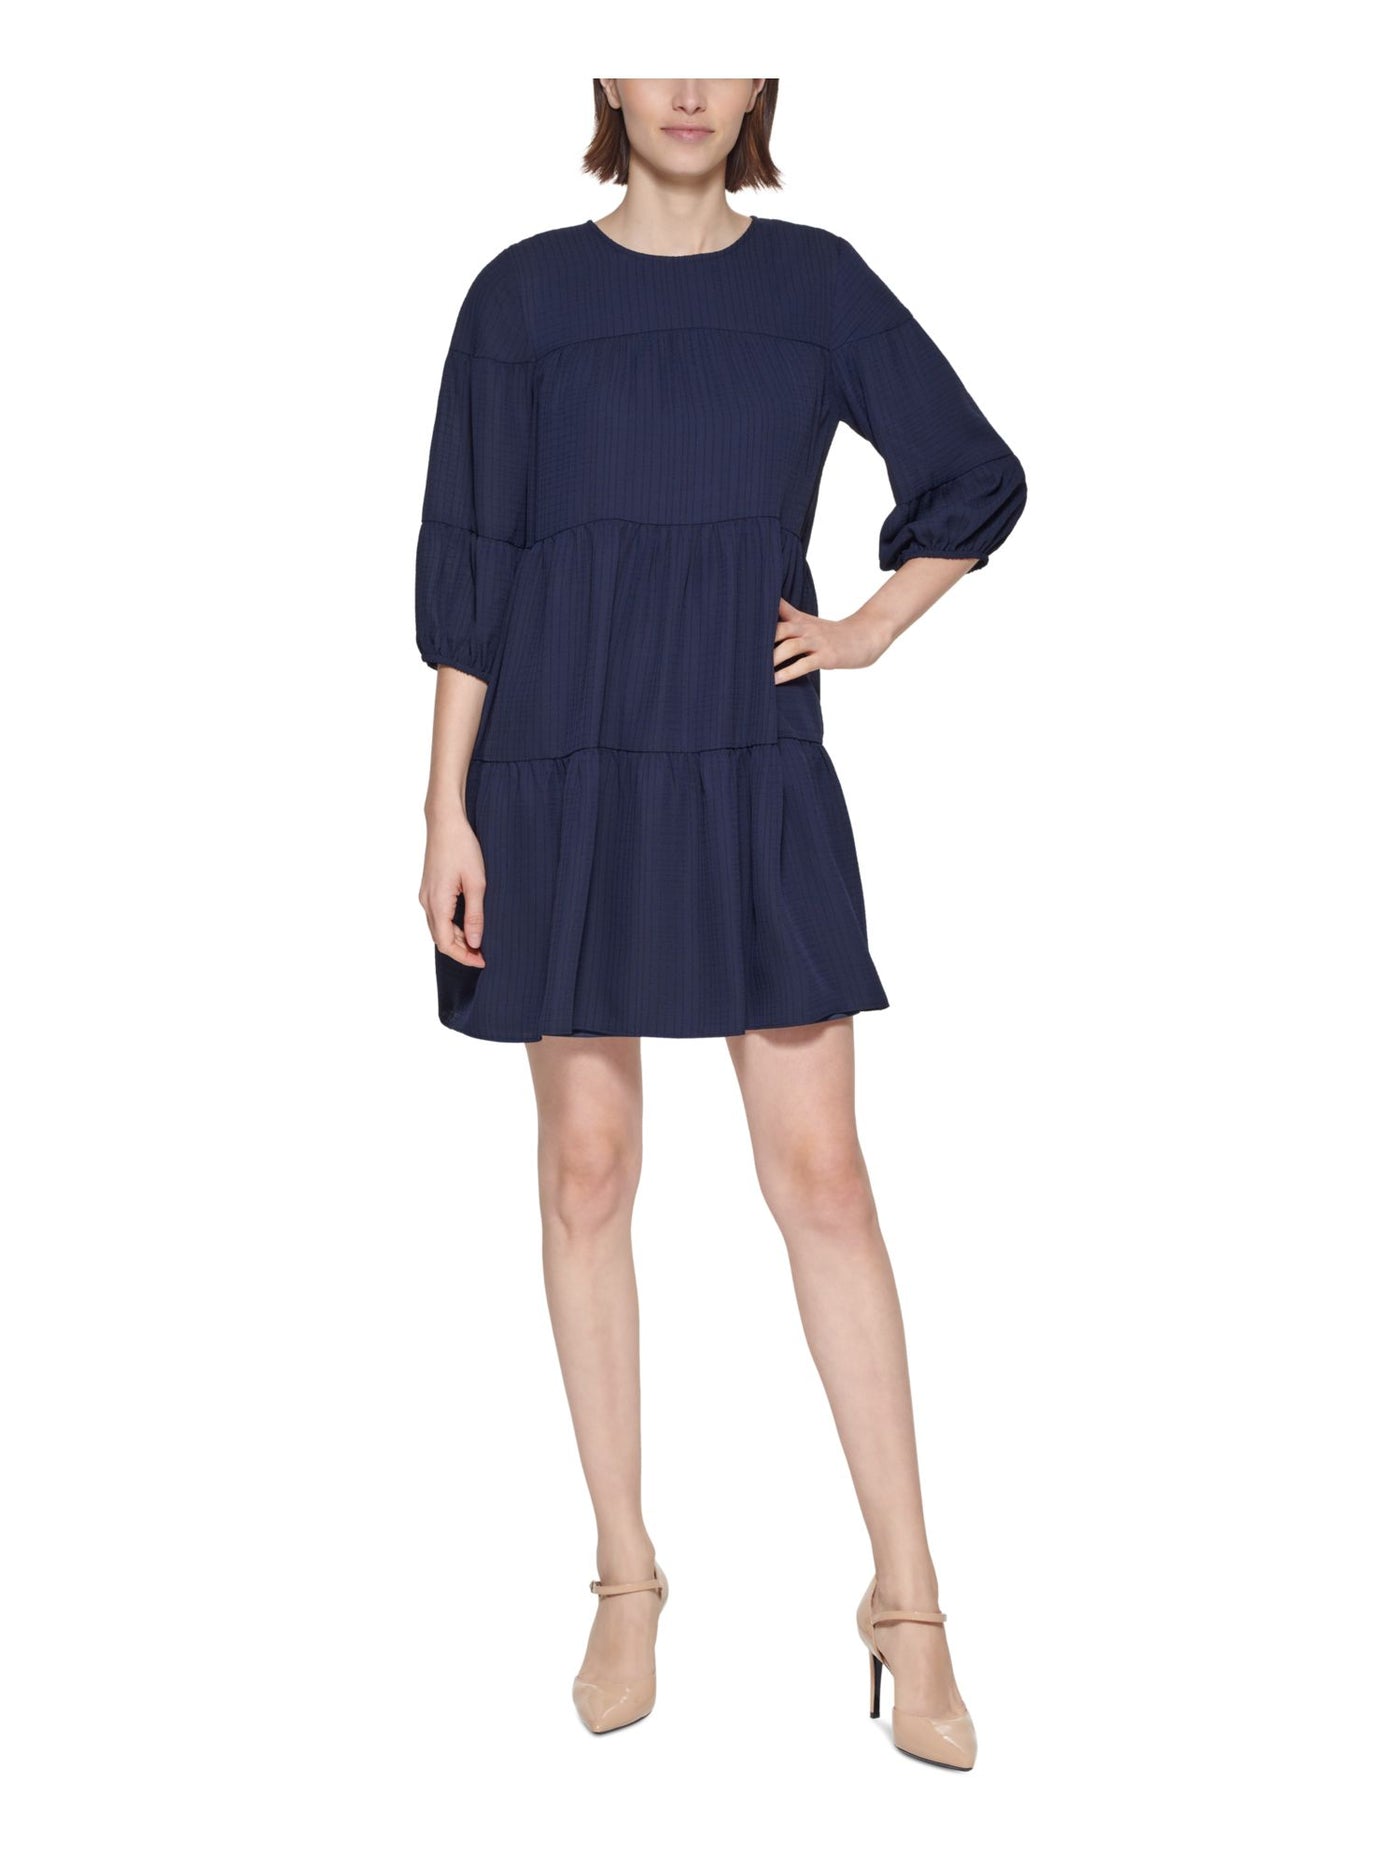 CALVIN KLEIN Womens Navy Textured Keyhole Back Tiered Lined 3/4 Sleeve Round Neck Short Shift Dress Petites 4P